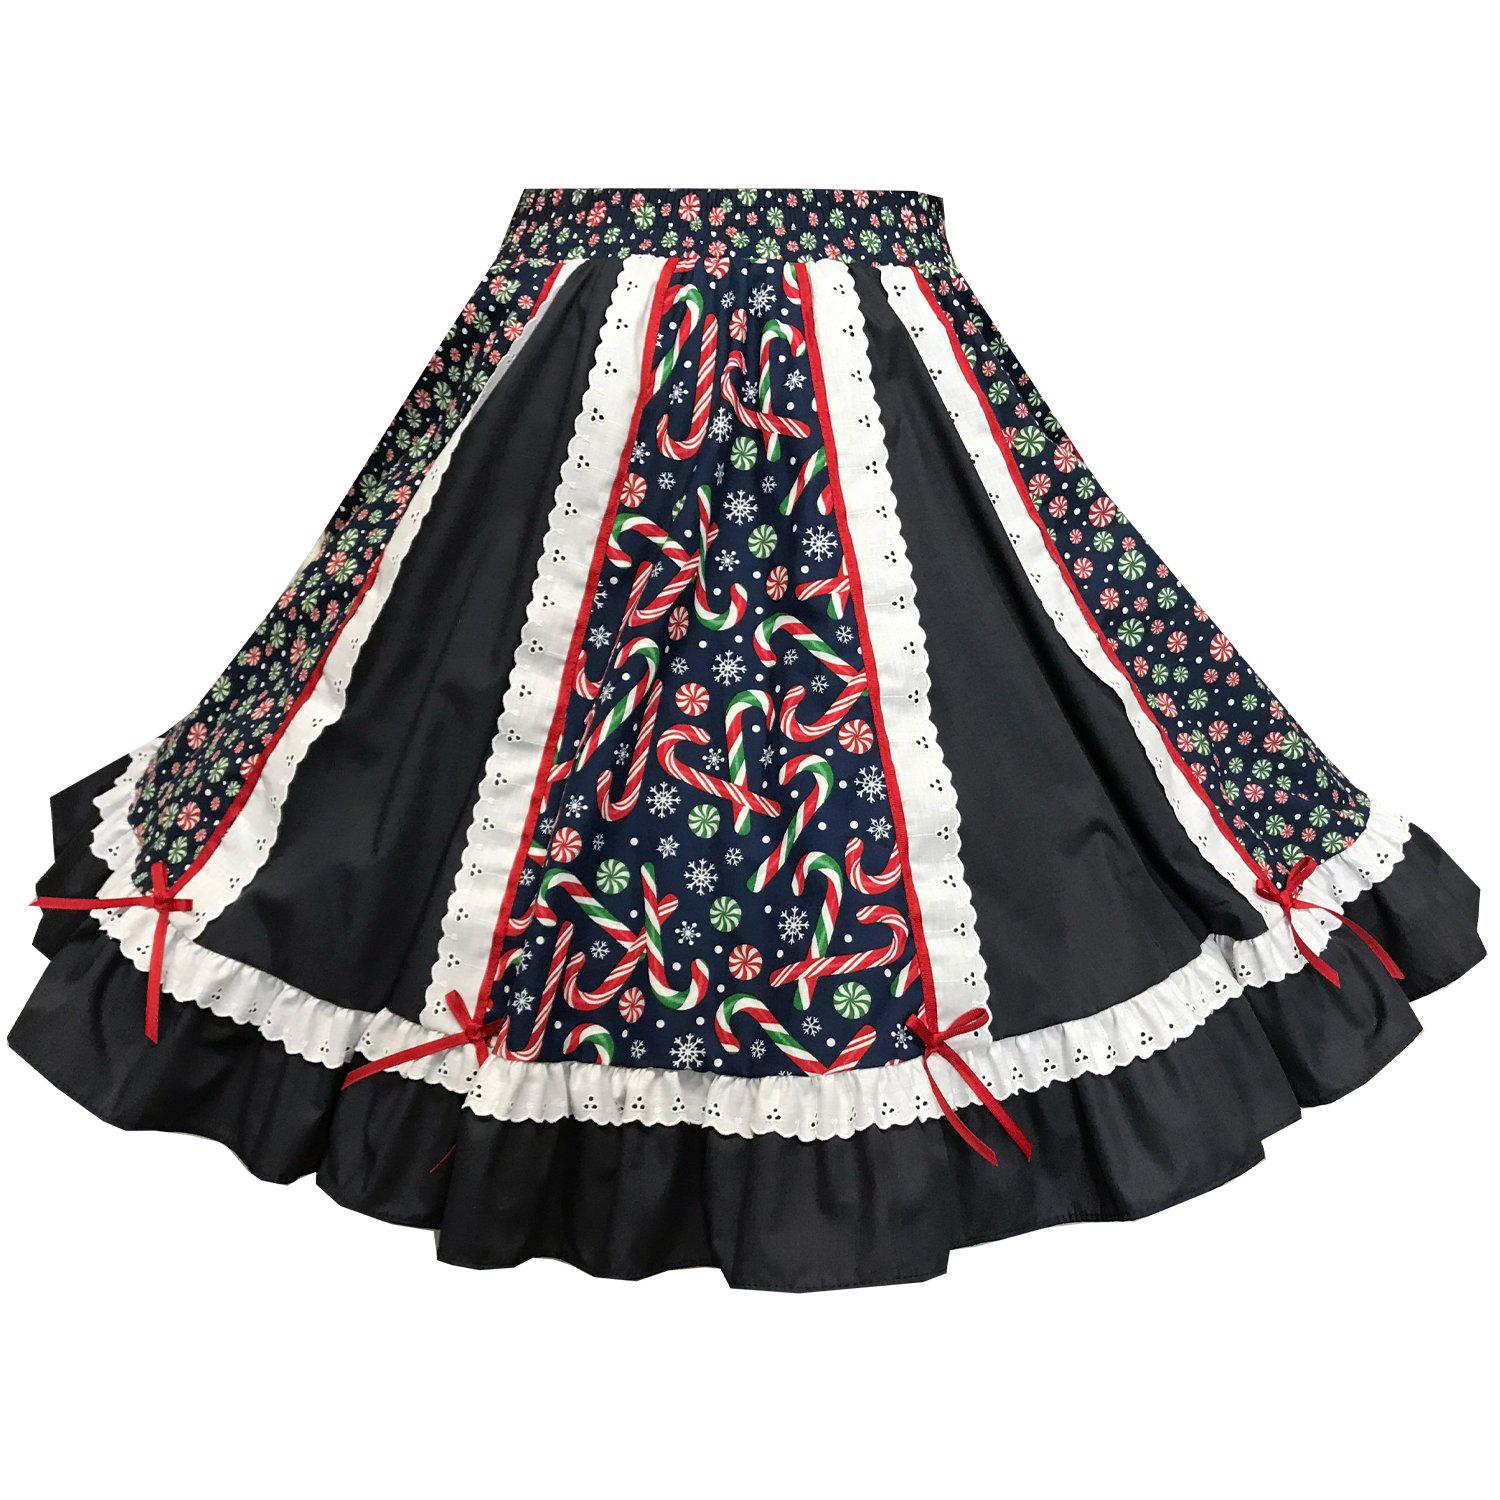 A Candy Cane Fun Square Dance Skirt made by Square Up Fashions with ruffles and bows.